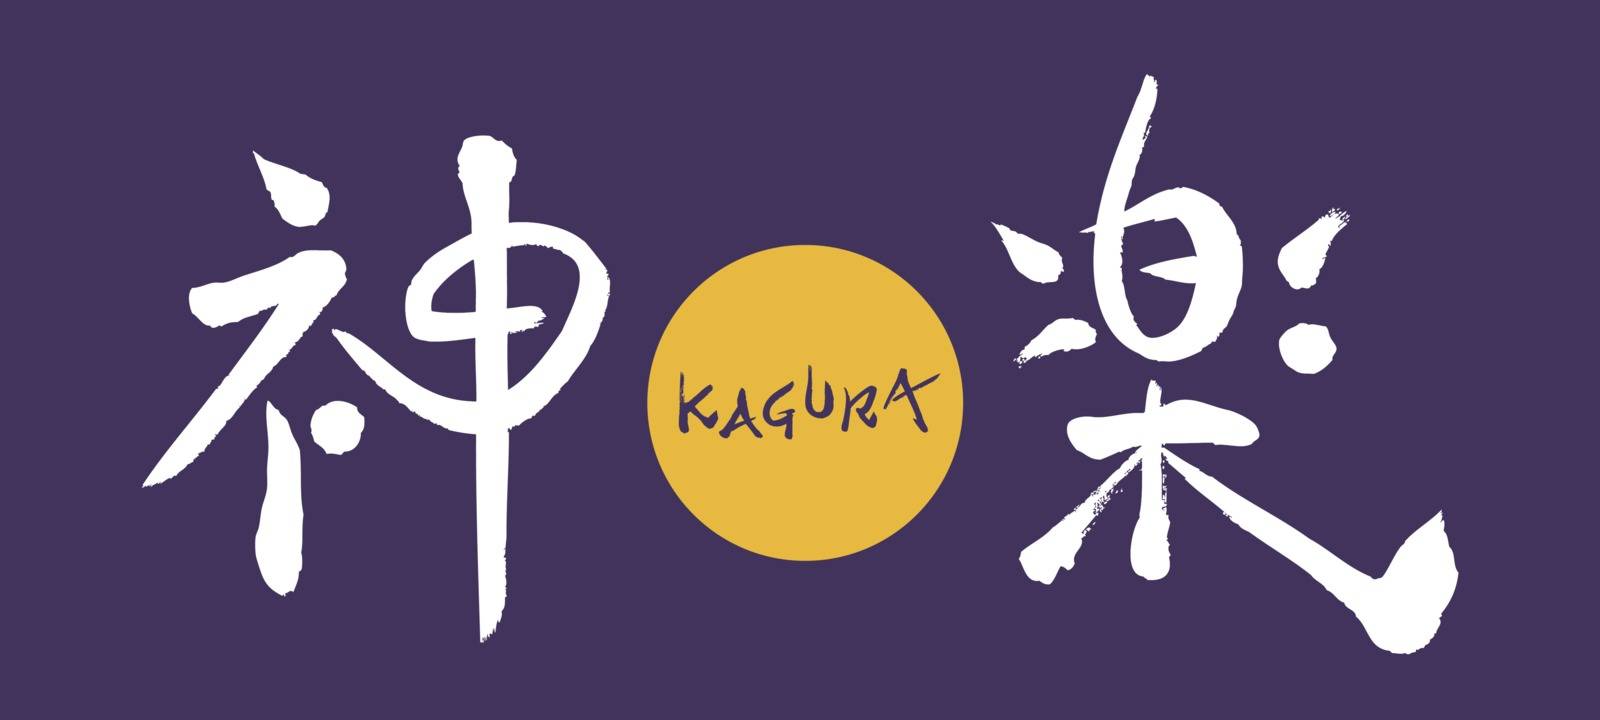 The character Kagura and moon.The Japanese character written on the picture means kagura. Kagura is japanese traditional Dance for God.